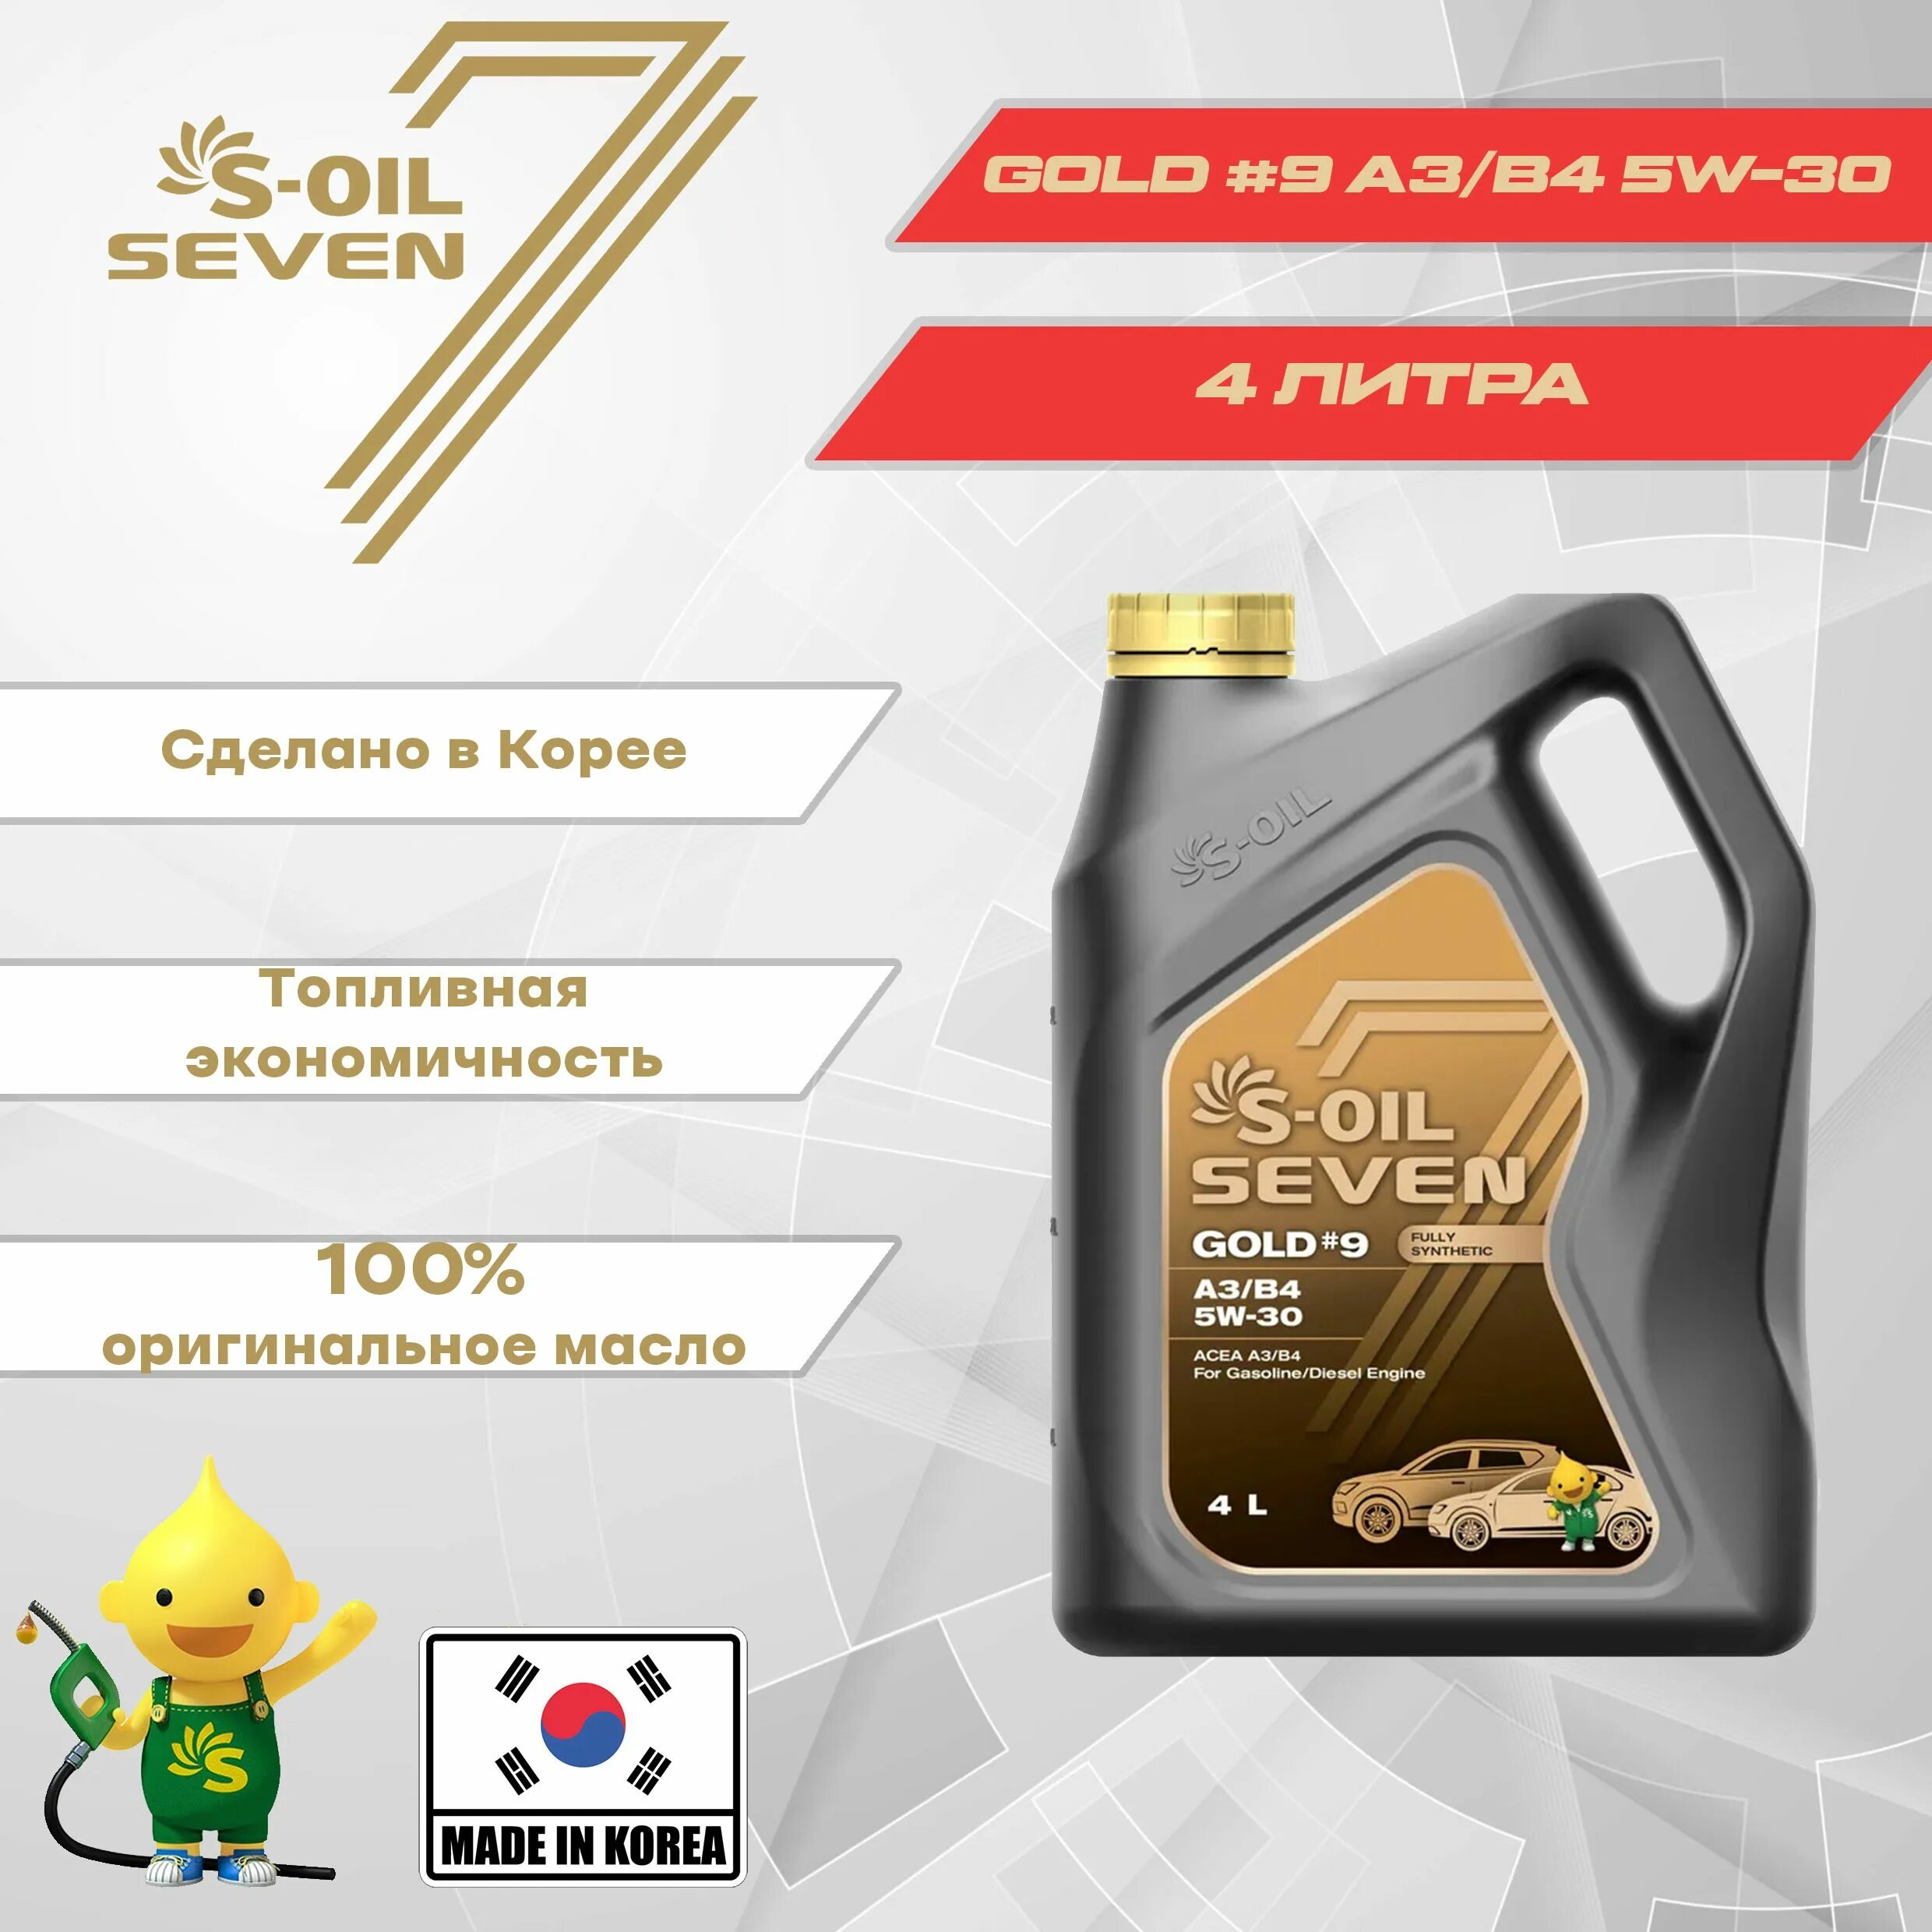 Масло севен. S-Oil Seven 5w-30 Gold 9. Масло s-Oil Seven 5w30. S-Oil Seven Gold #9 Pao 5w30 c3 4л. S-Oil Seven Gold#9 c3 5w-30.